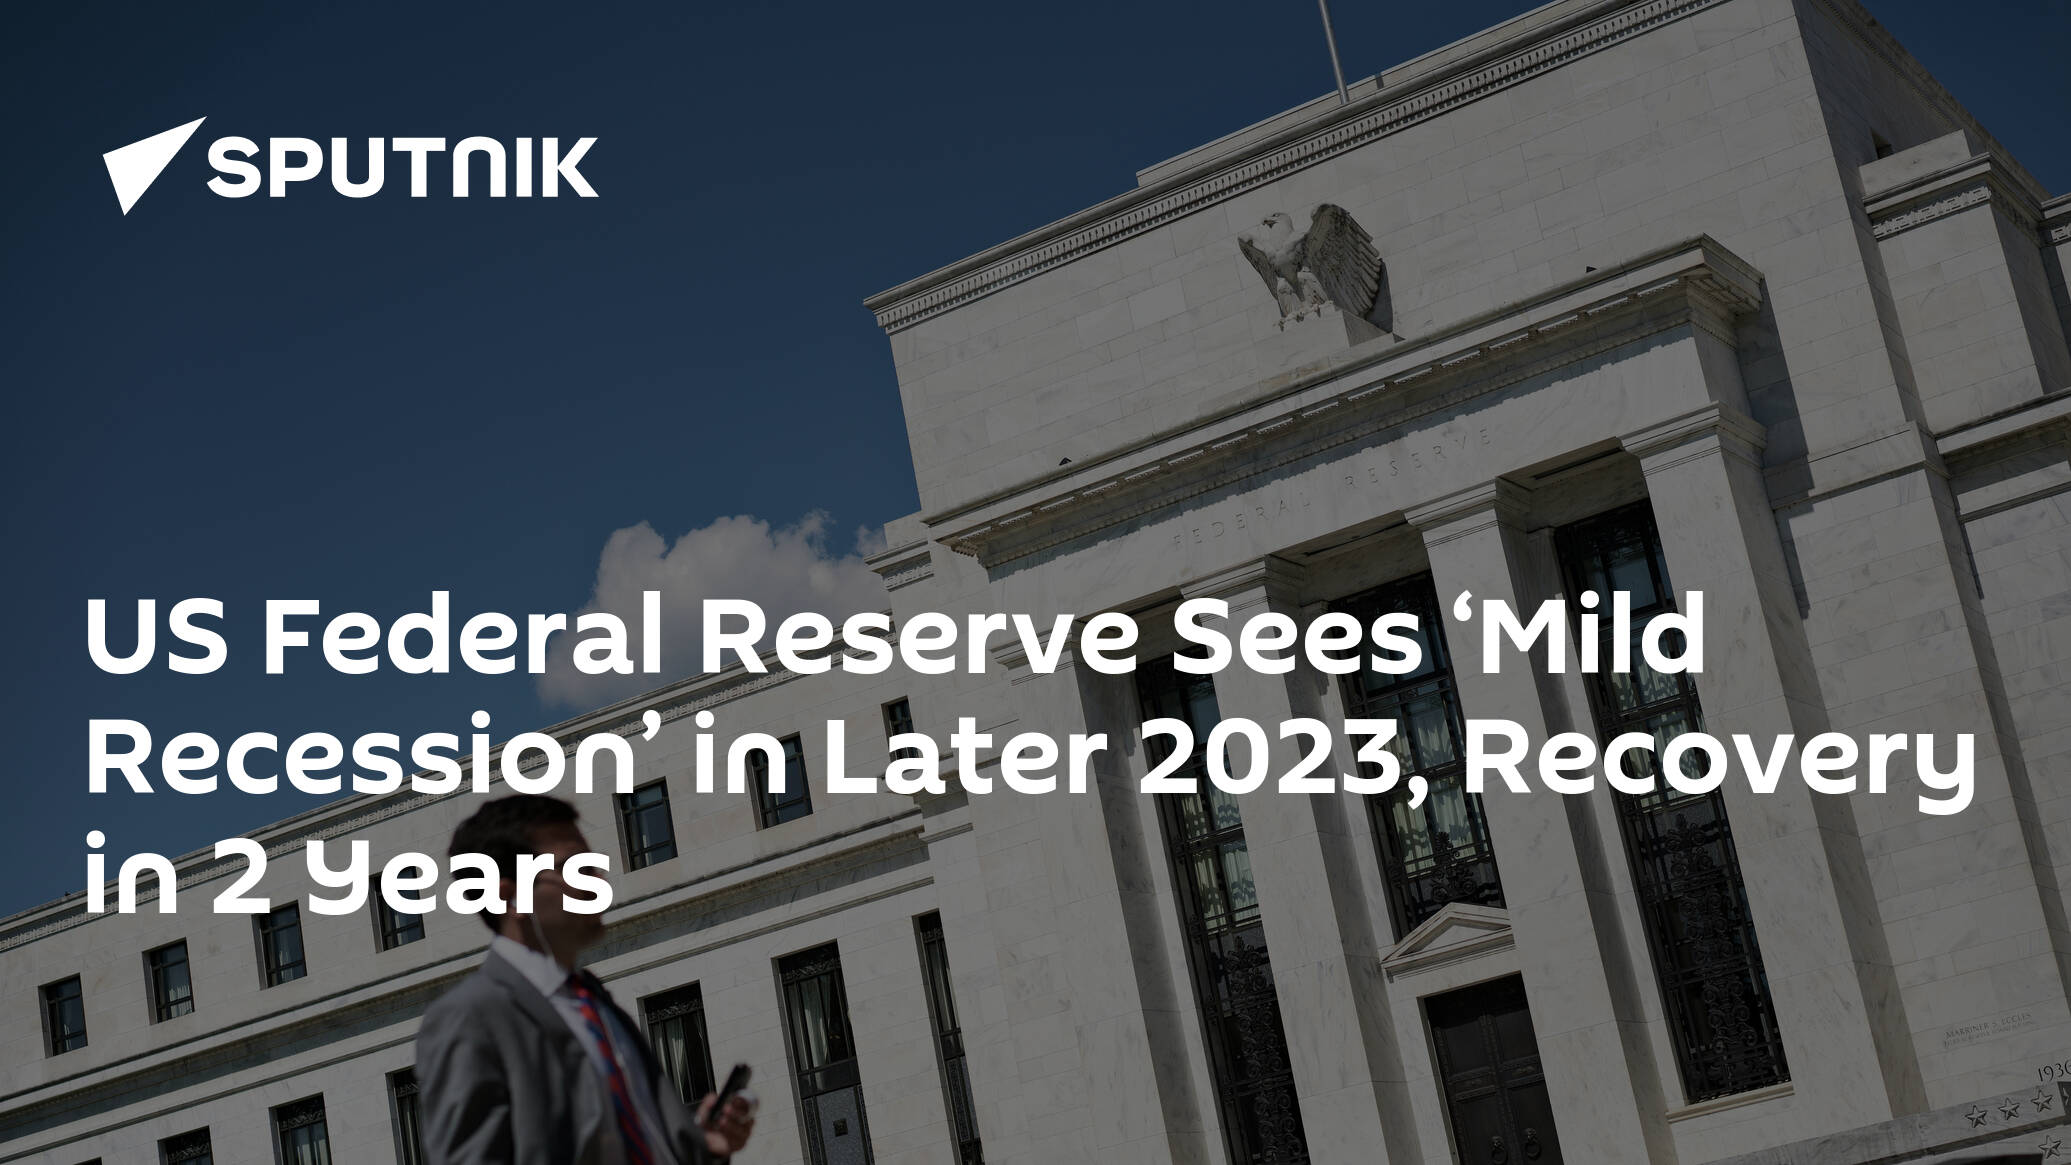 US Federal Reserve Sees ‘Mild Recession’ in Later 2023, Recovery in 2 Years